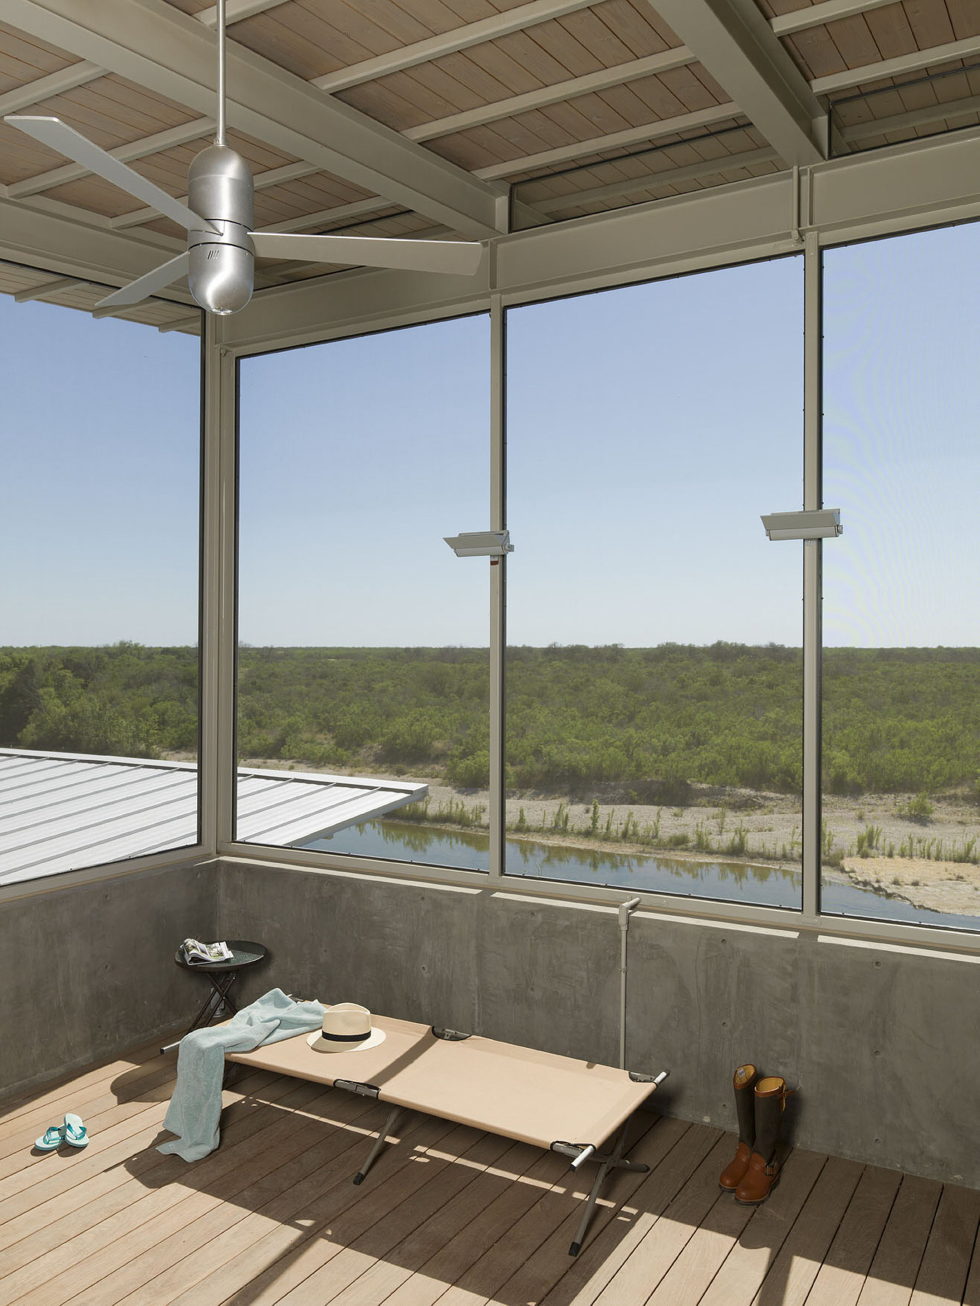 The House Made Of Aluminum Trailer In Texas From Andrew Hinman Architecture 10